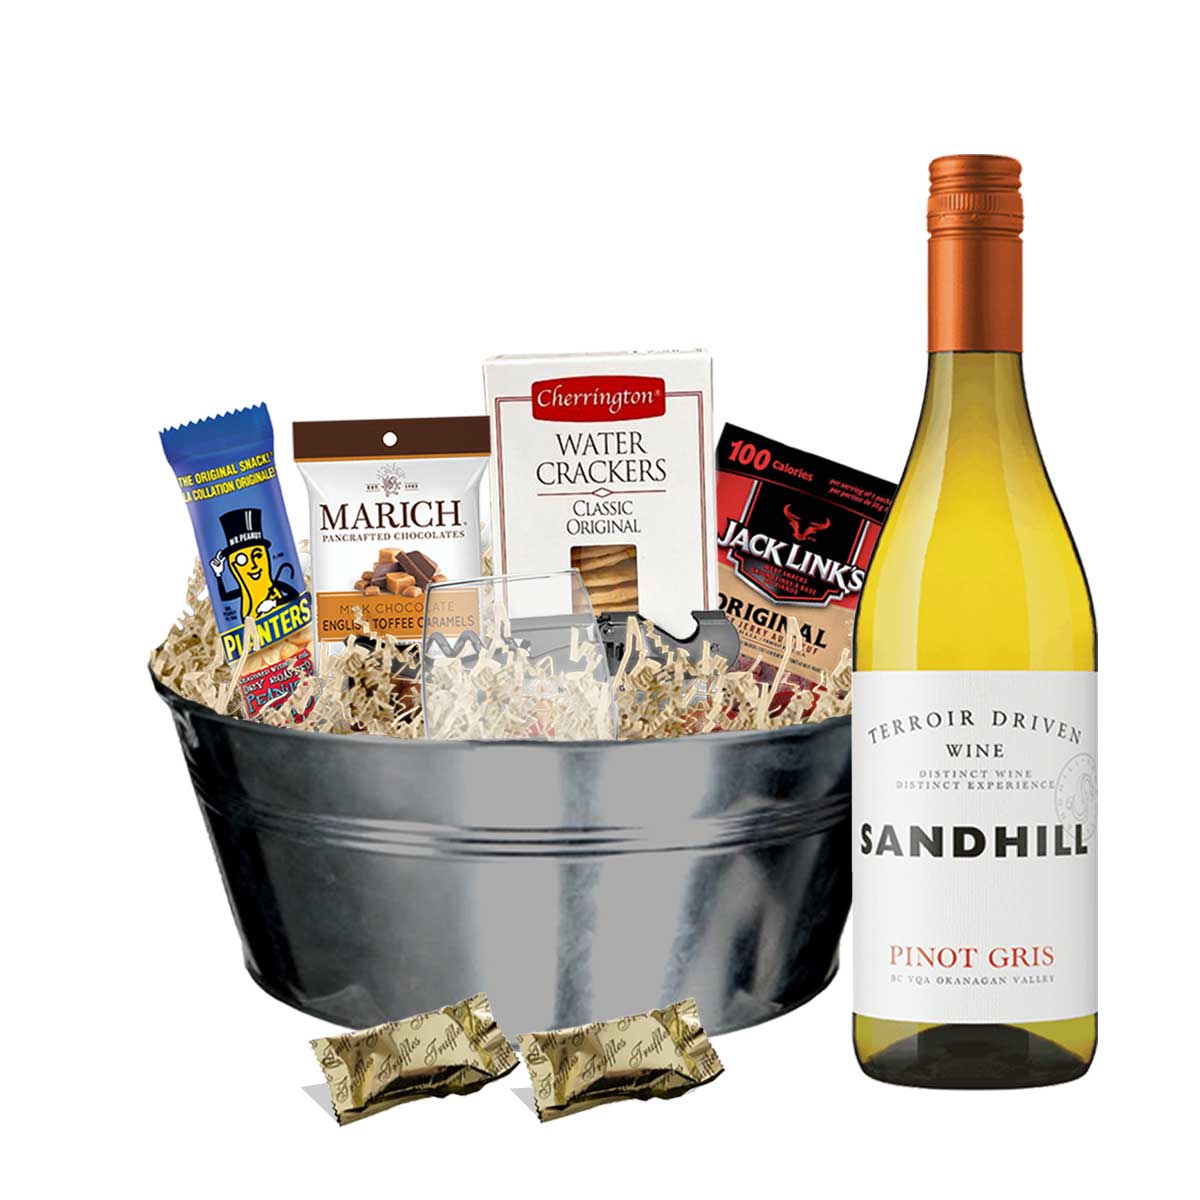 TAG Liquor Stores BC - Sand hill Pinot Gris 750ml Gift Basket